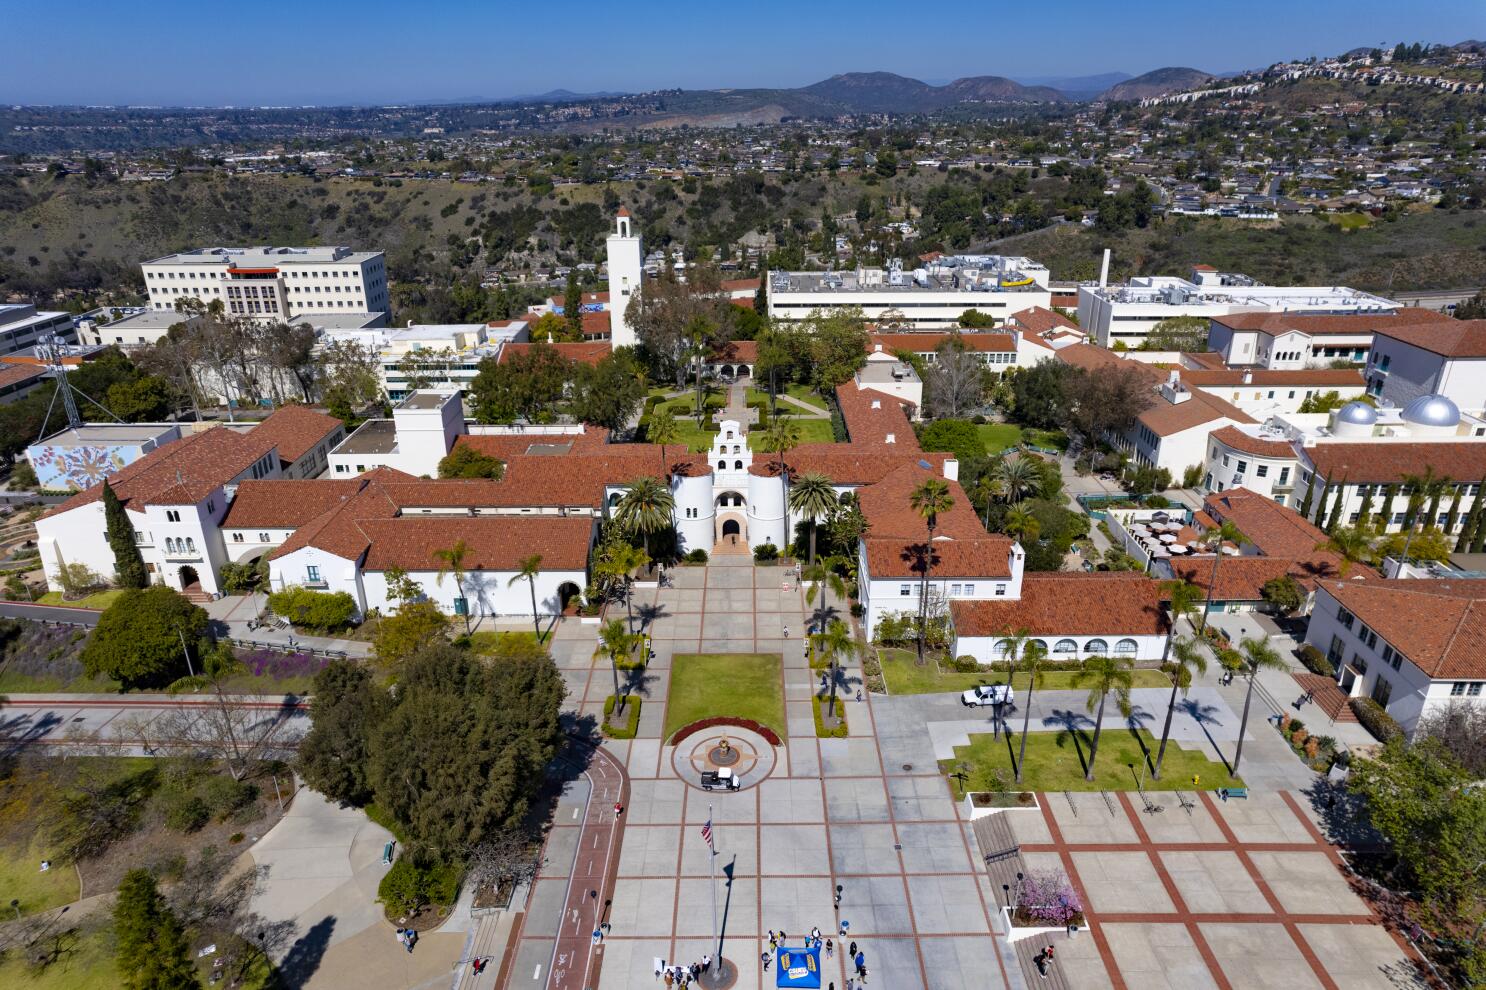 San Diego State University looks to the future on its 125th Anniversary -  The San Diego Union-Tribune